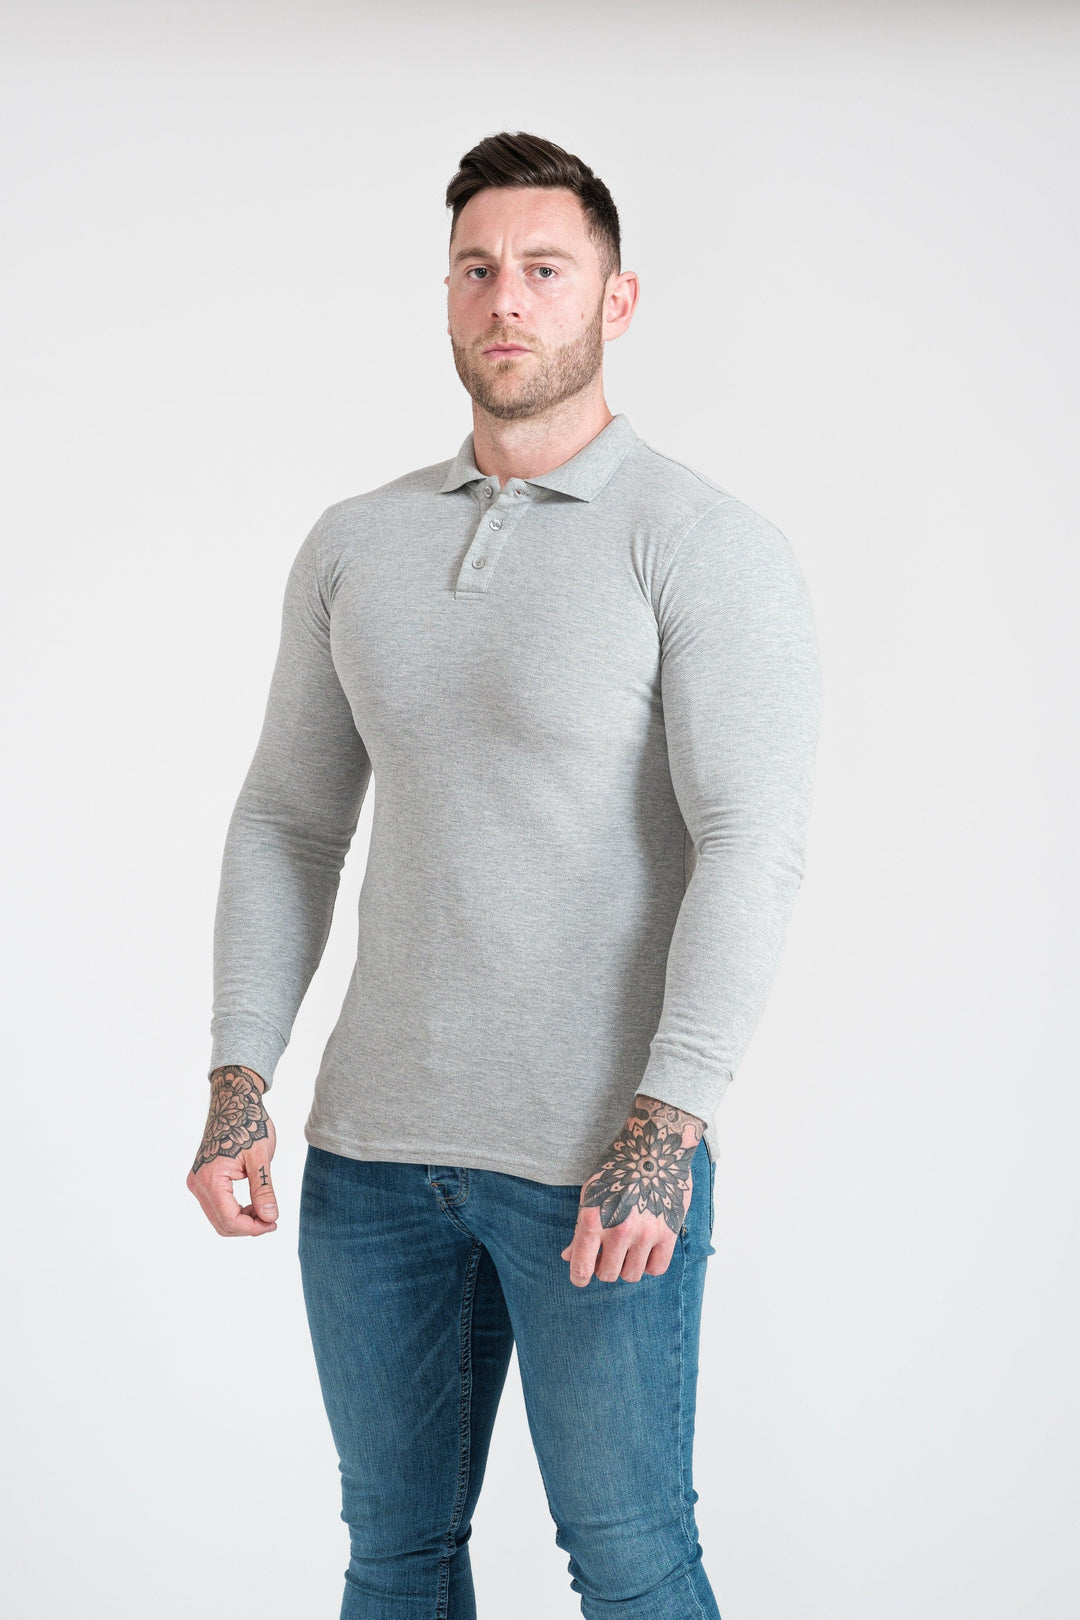 Mens Grey Tapered Fit Polo Shirt. A Proportionally Fitted and Muscle Fit Polo. The best polo shirts for muscular guys.